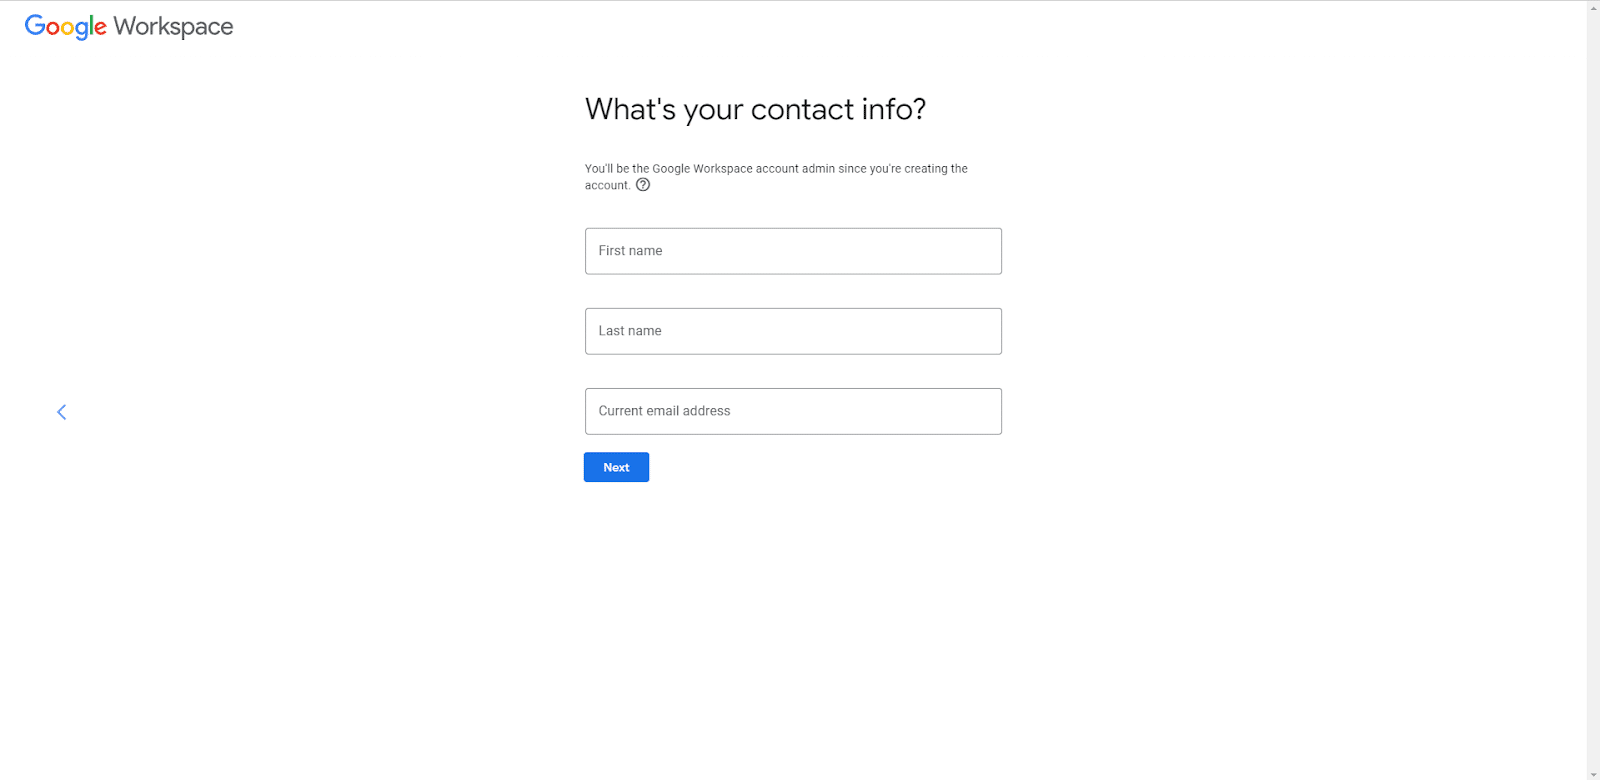 Google Workspace's onboarding page with contact information fields